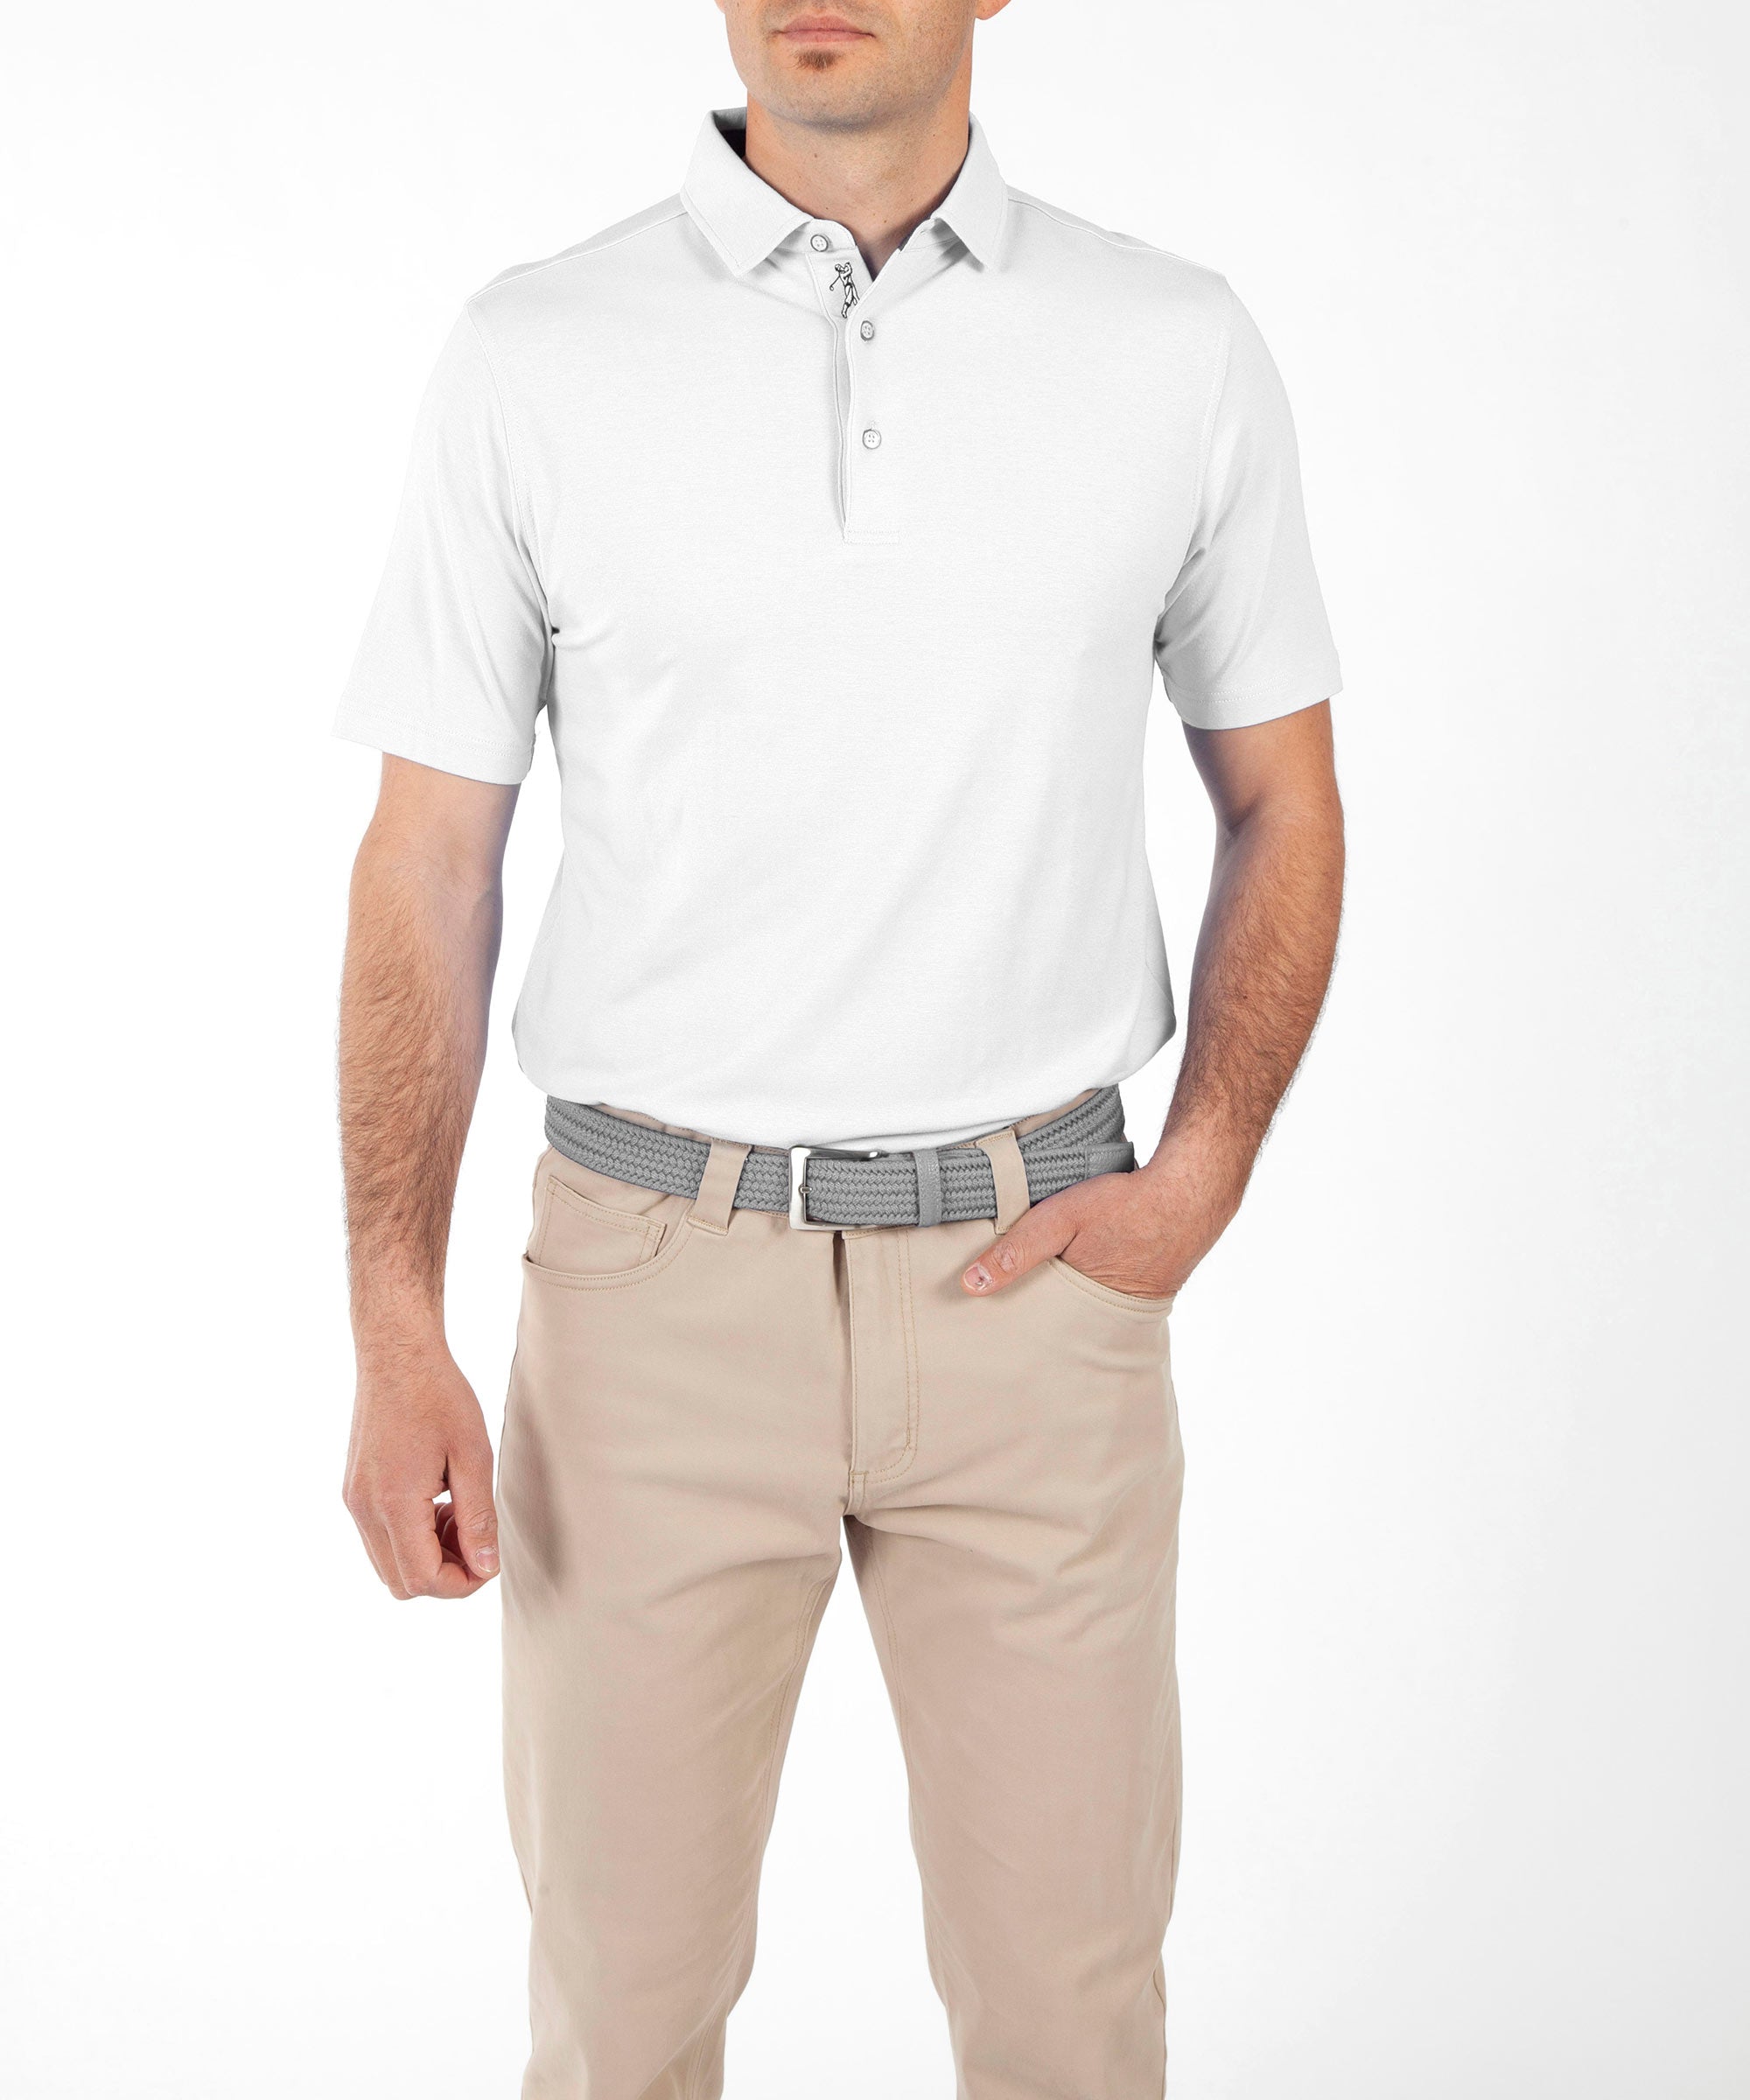 eFX Performance Cotton Solid Short Sleeve Polo Shirt